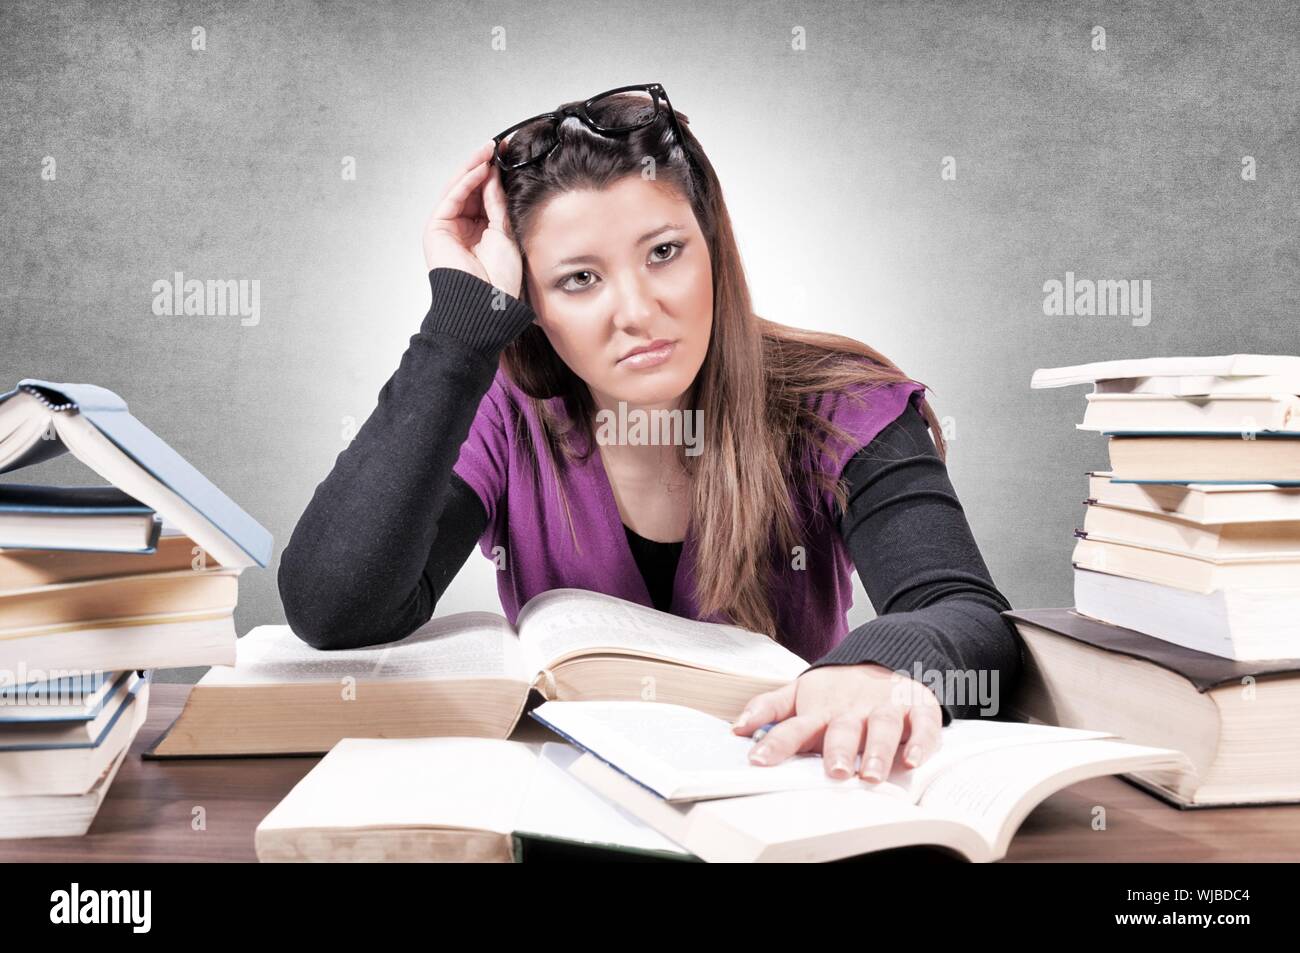 Female with contempt for learning on gray background Stock Photo